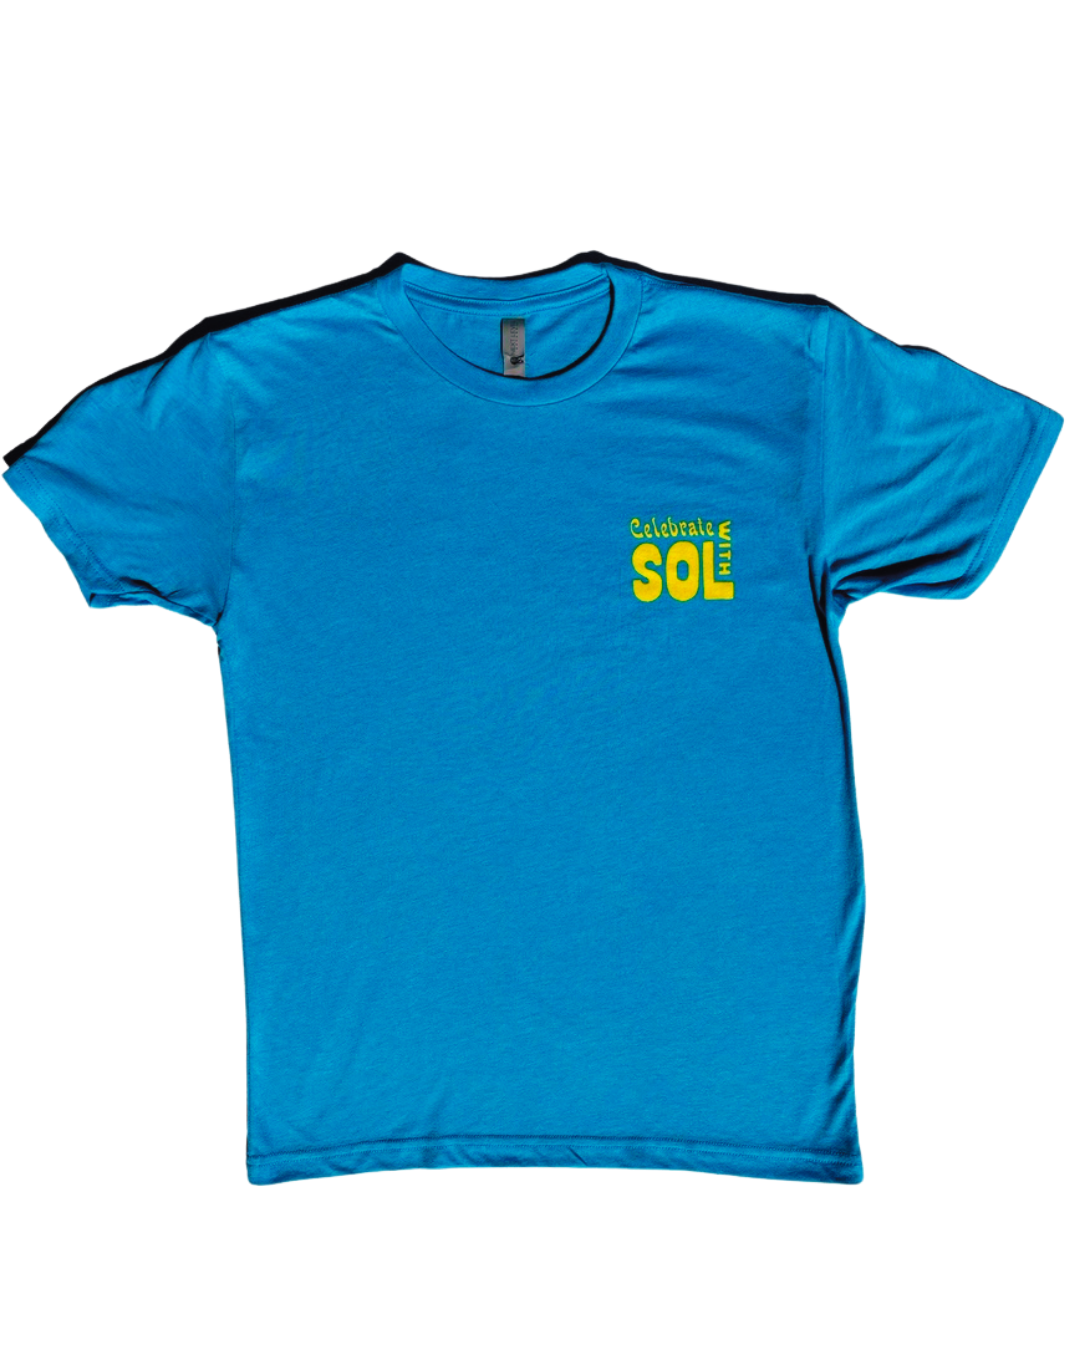 Celebrate with Sol Tee - Vintage Turquoise